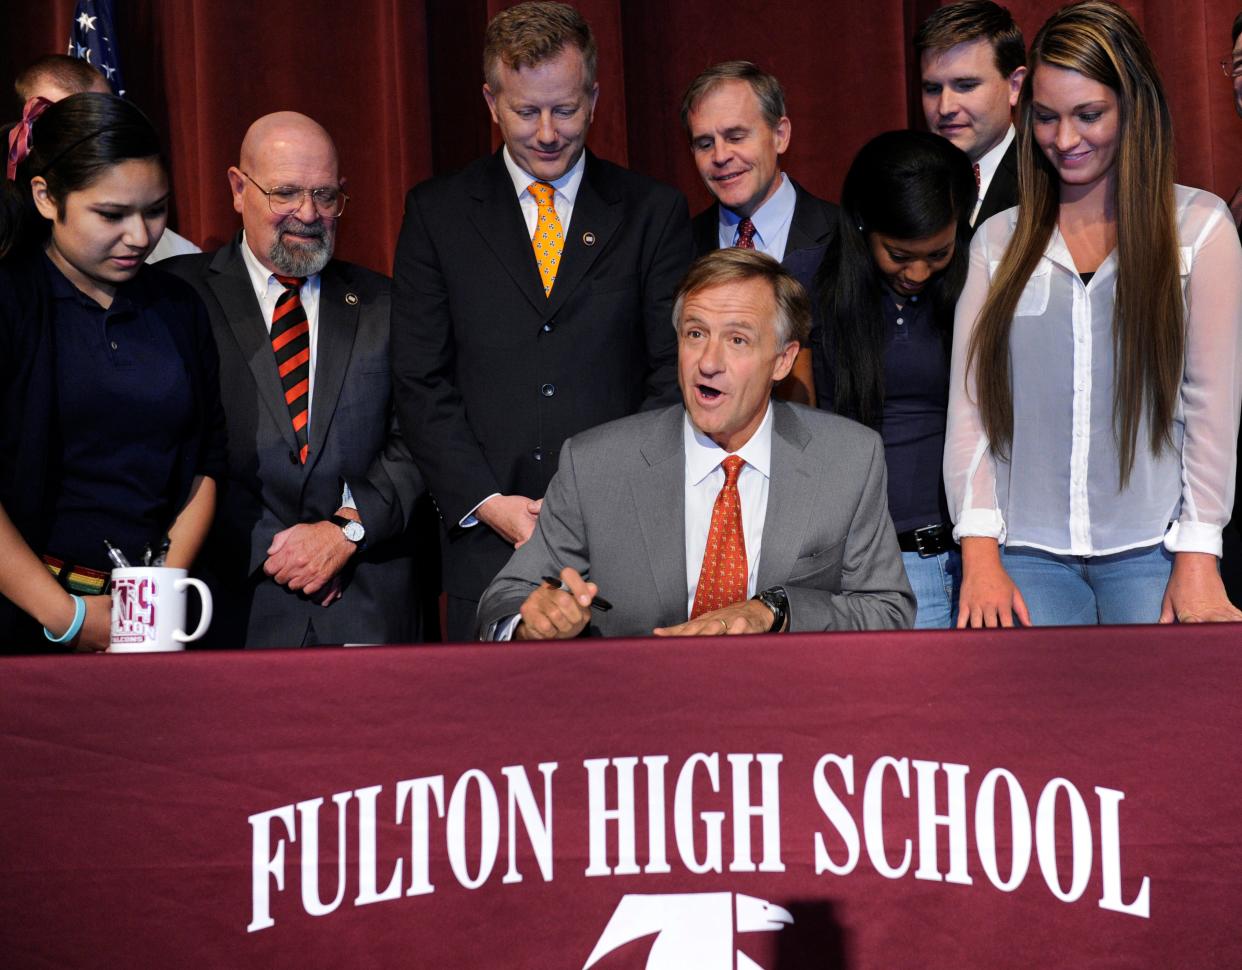 Gov. Bill Haslam at a ceremonial signing of the Tennessee Promise Bill at Fulton High School in Knoxville in 2014.